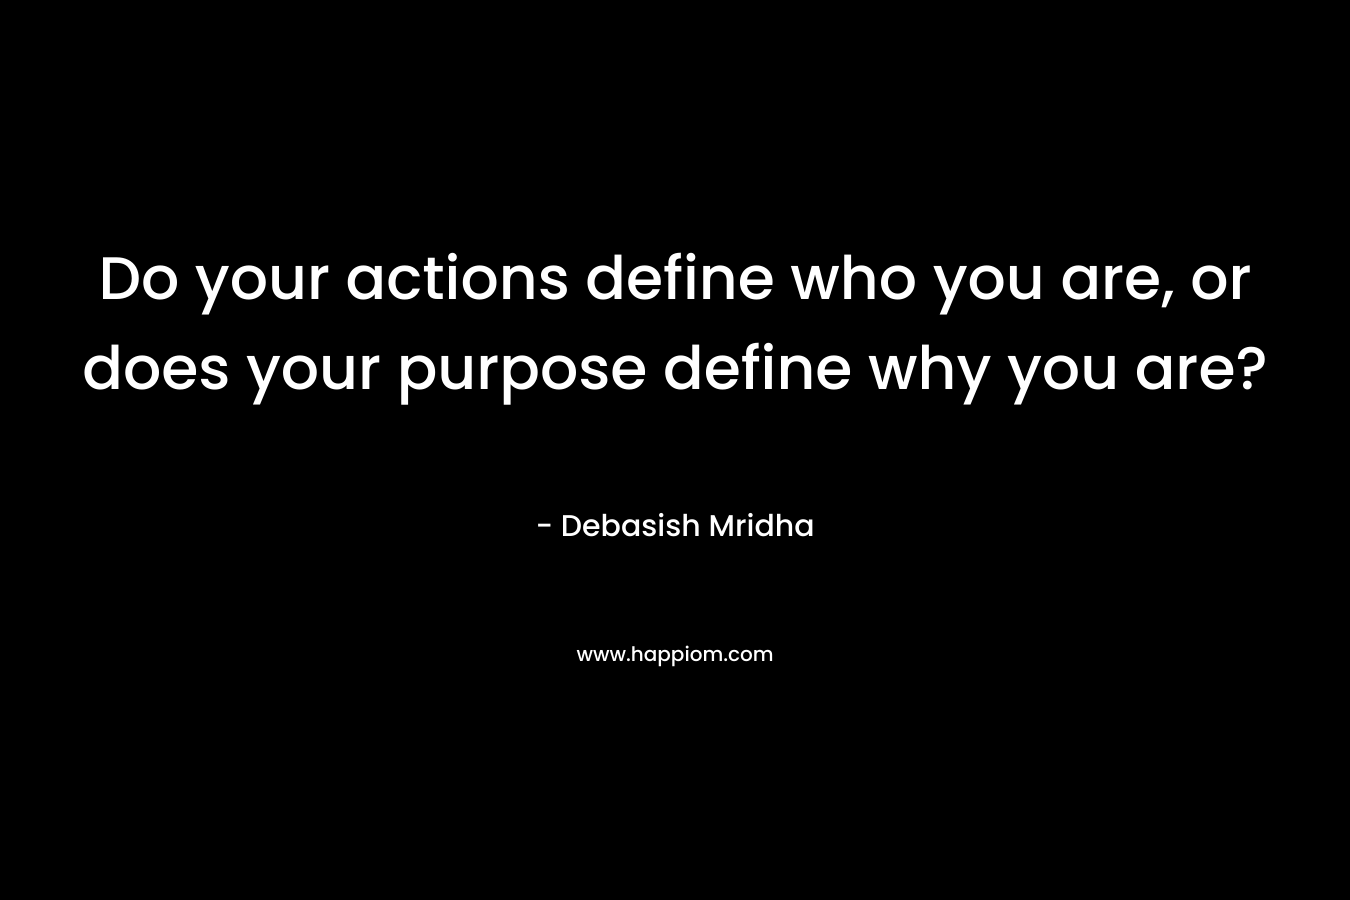 Do your actions define who you are, or does your purpose define why you are?